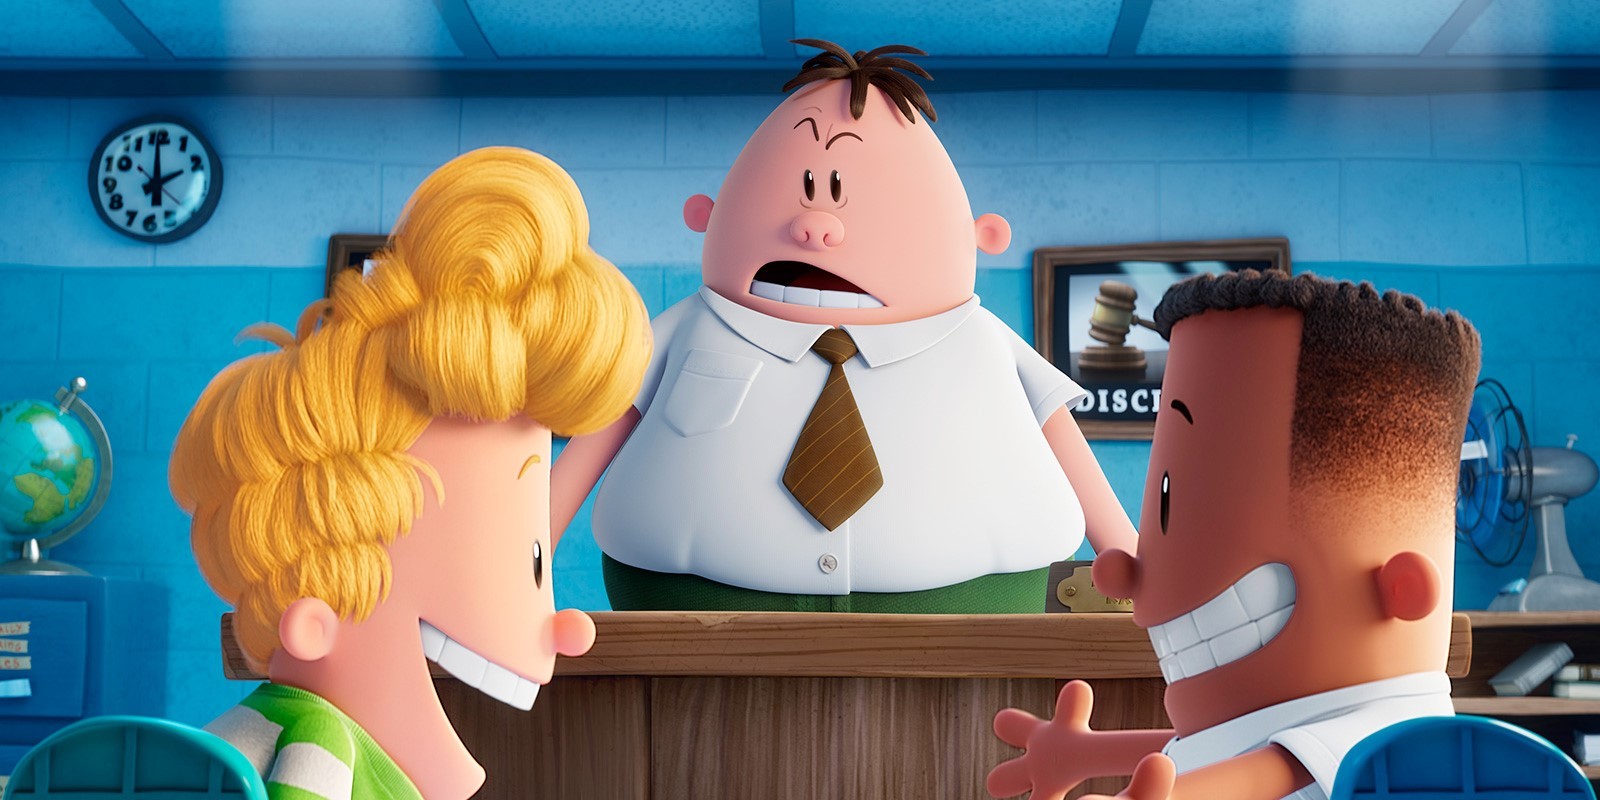 Harold Hutchins, Mr. Krupp/Captain Underpants and George Beard from 20th Century Fox's Captain Underpants: The First Epic Movie (2017)